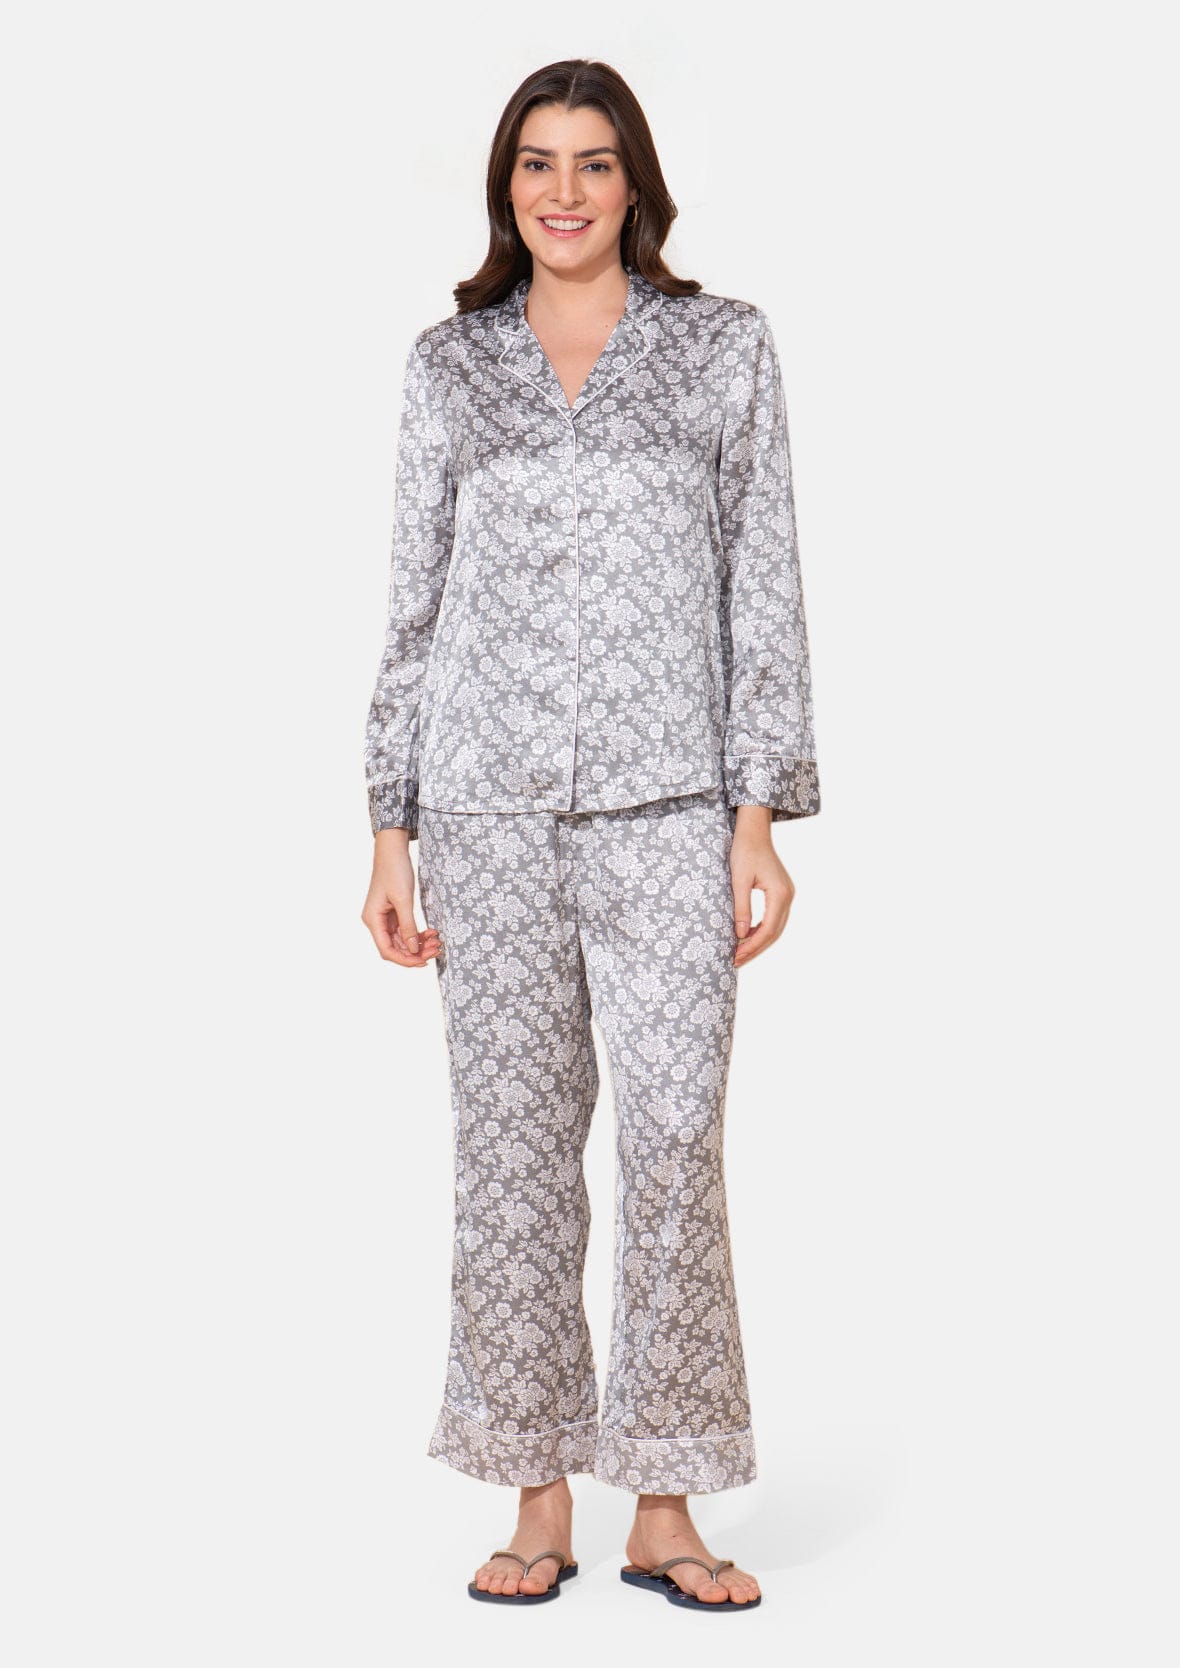 Collared Nightwear Set With Piping Detail